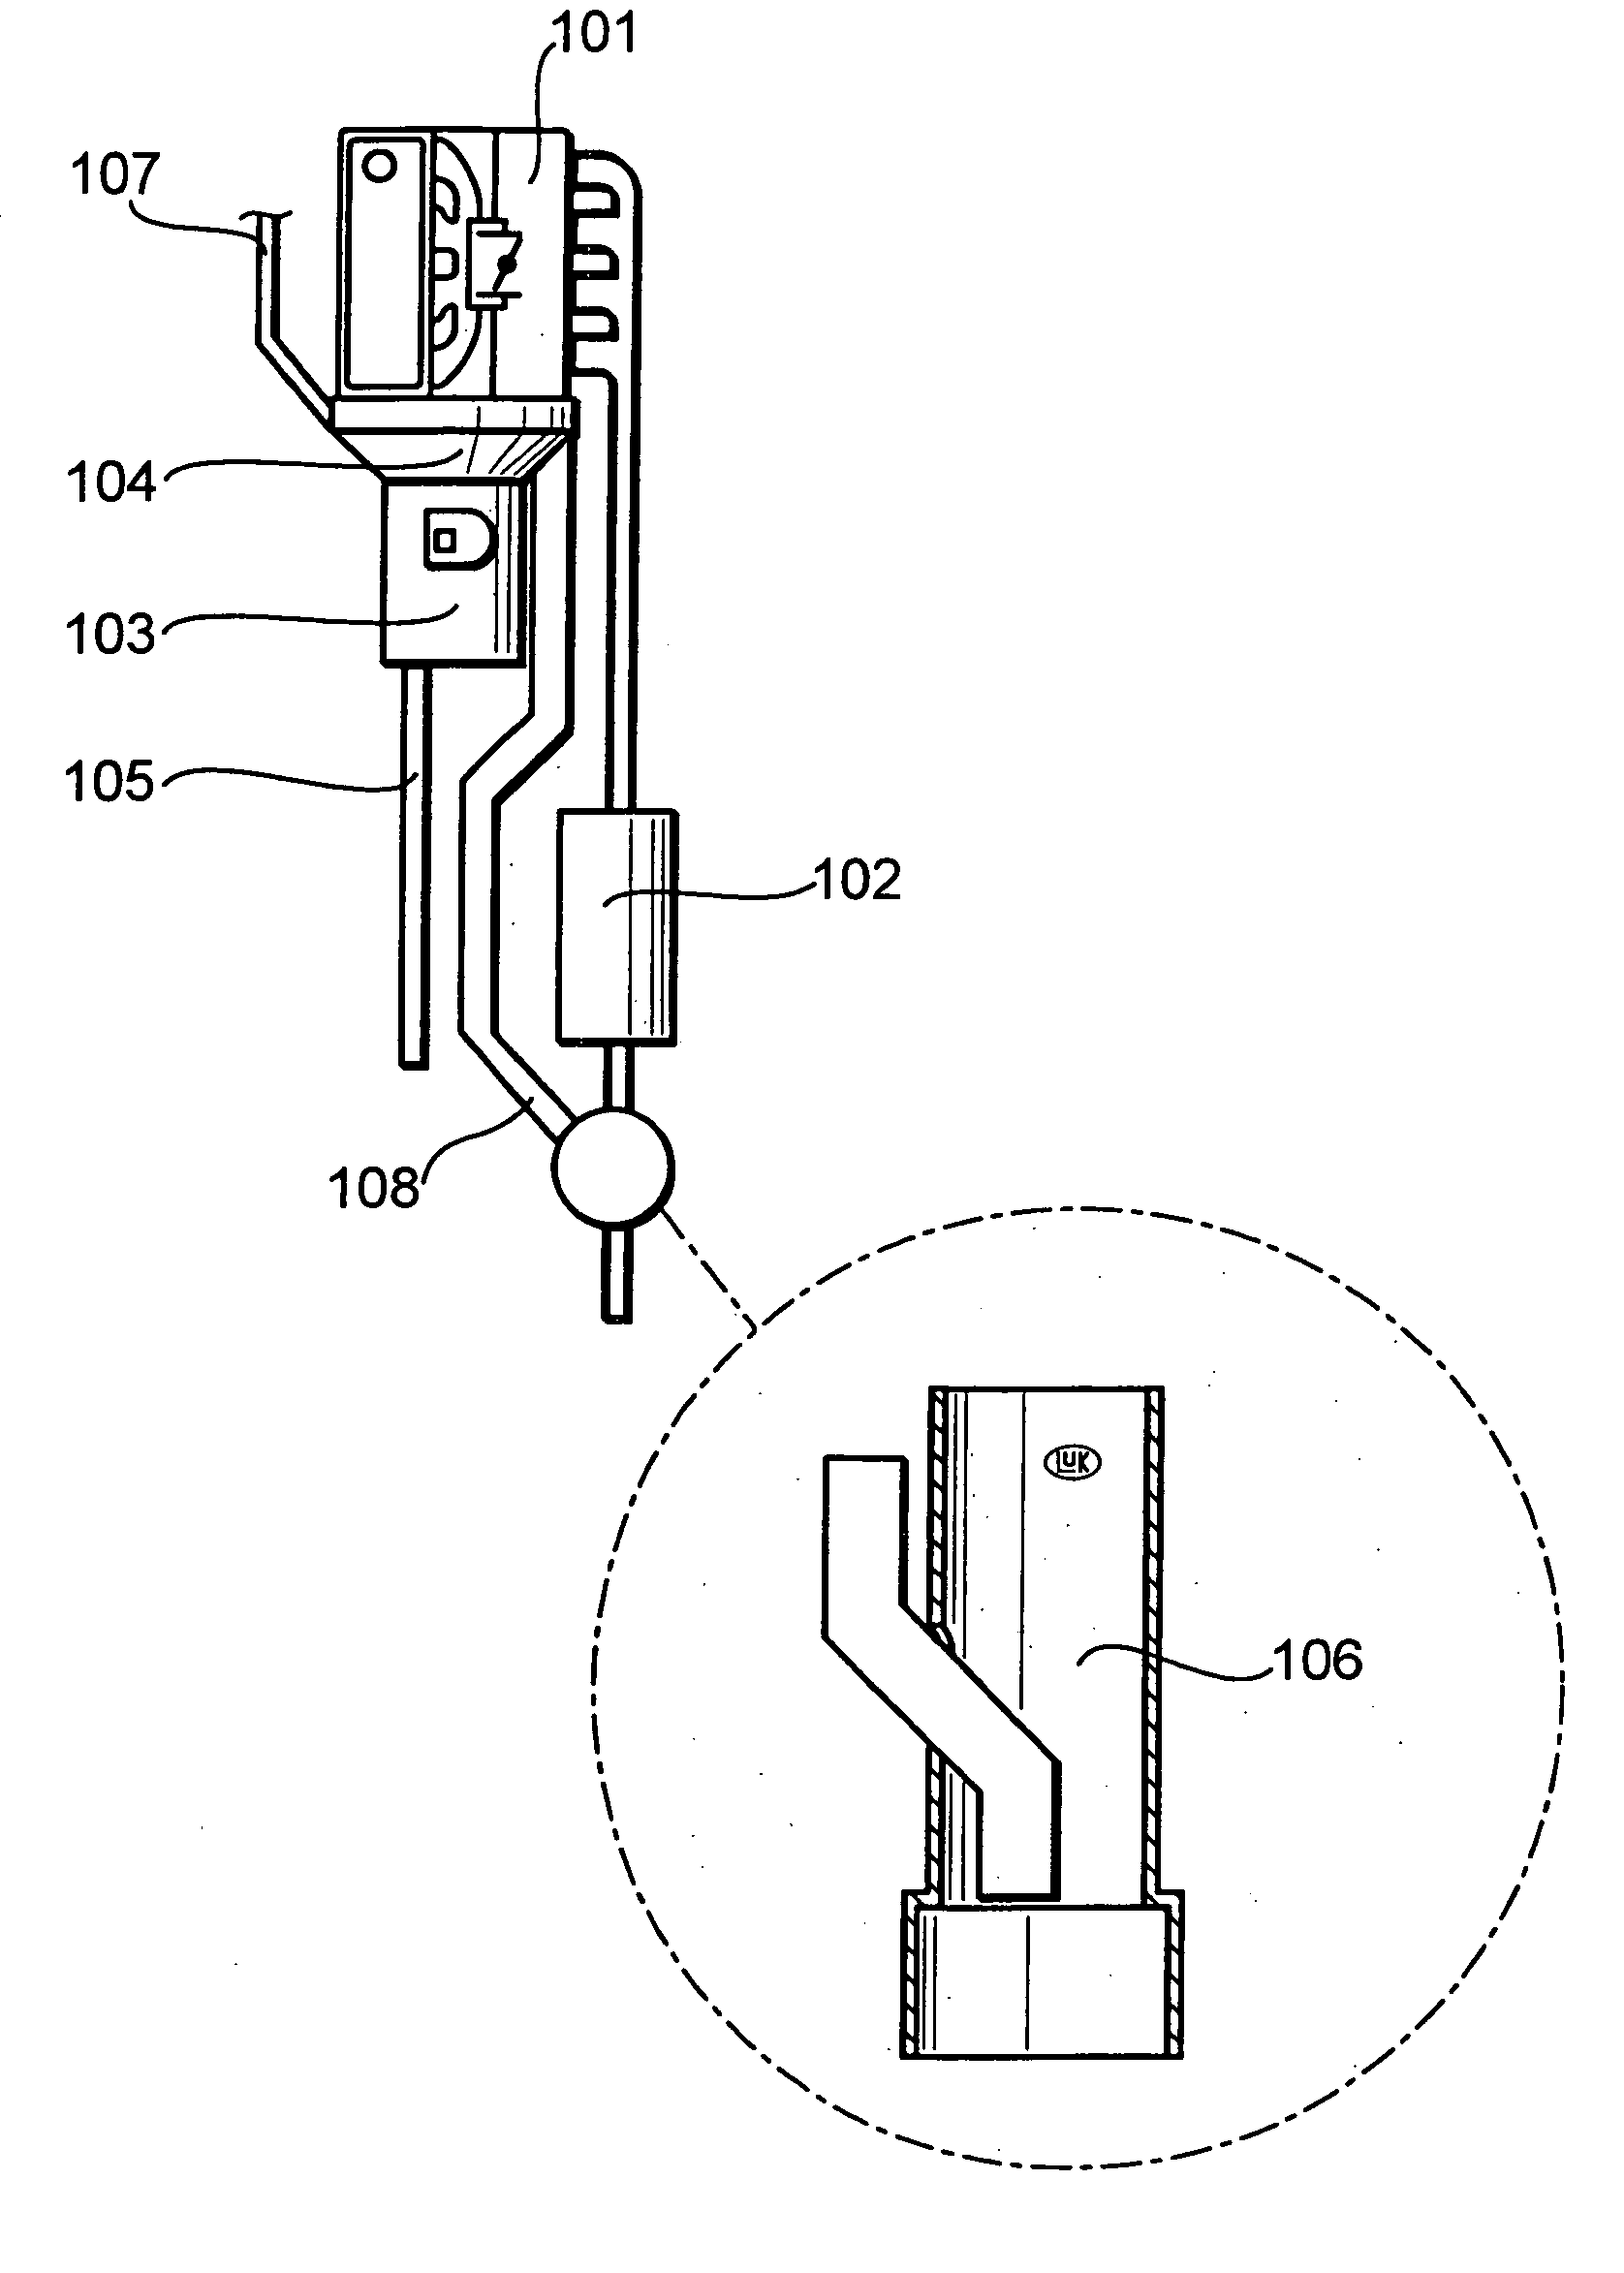 Method and system for cooling the clutch system of a transmission